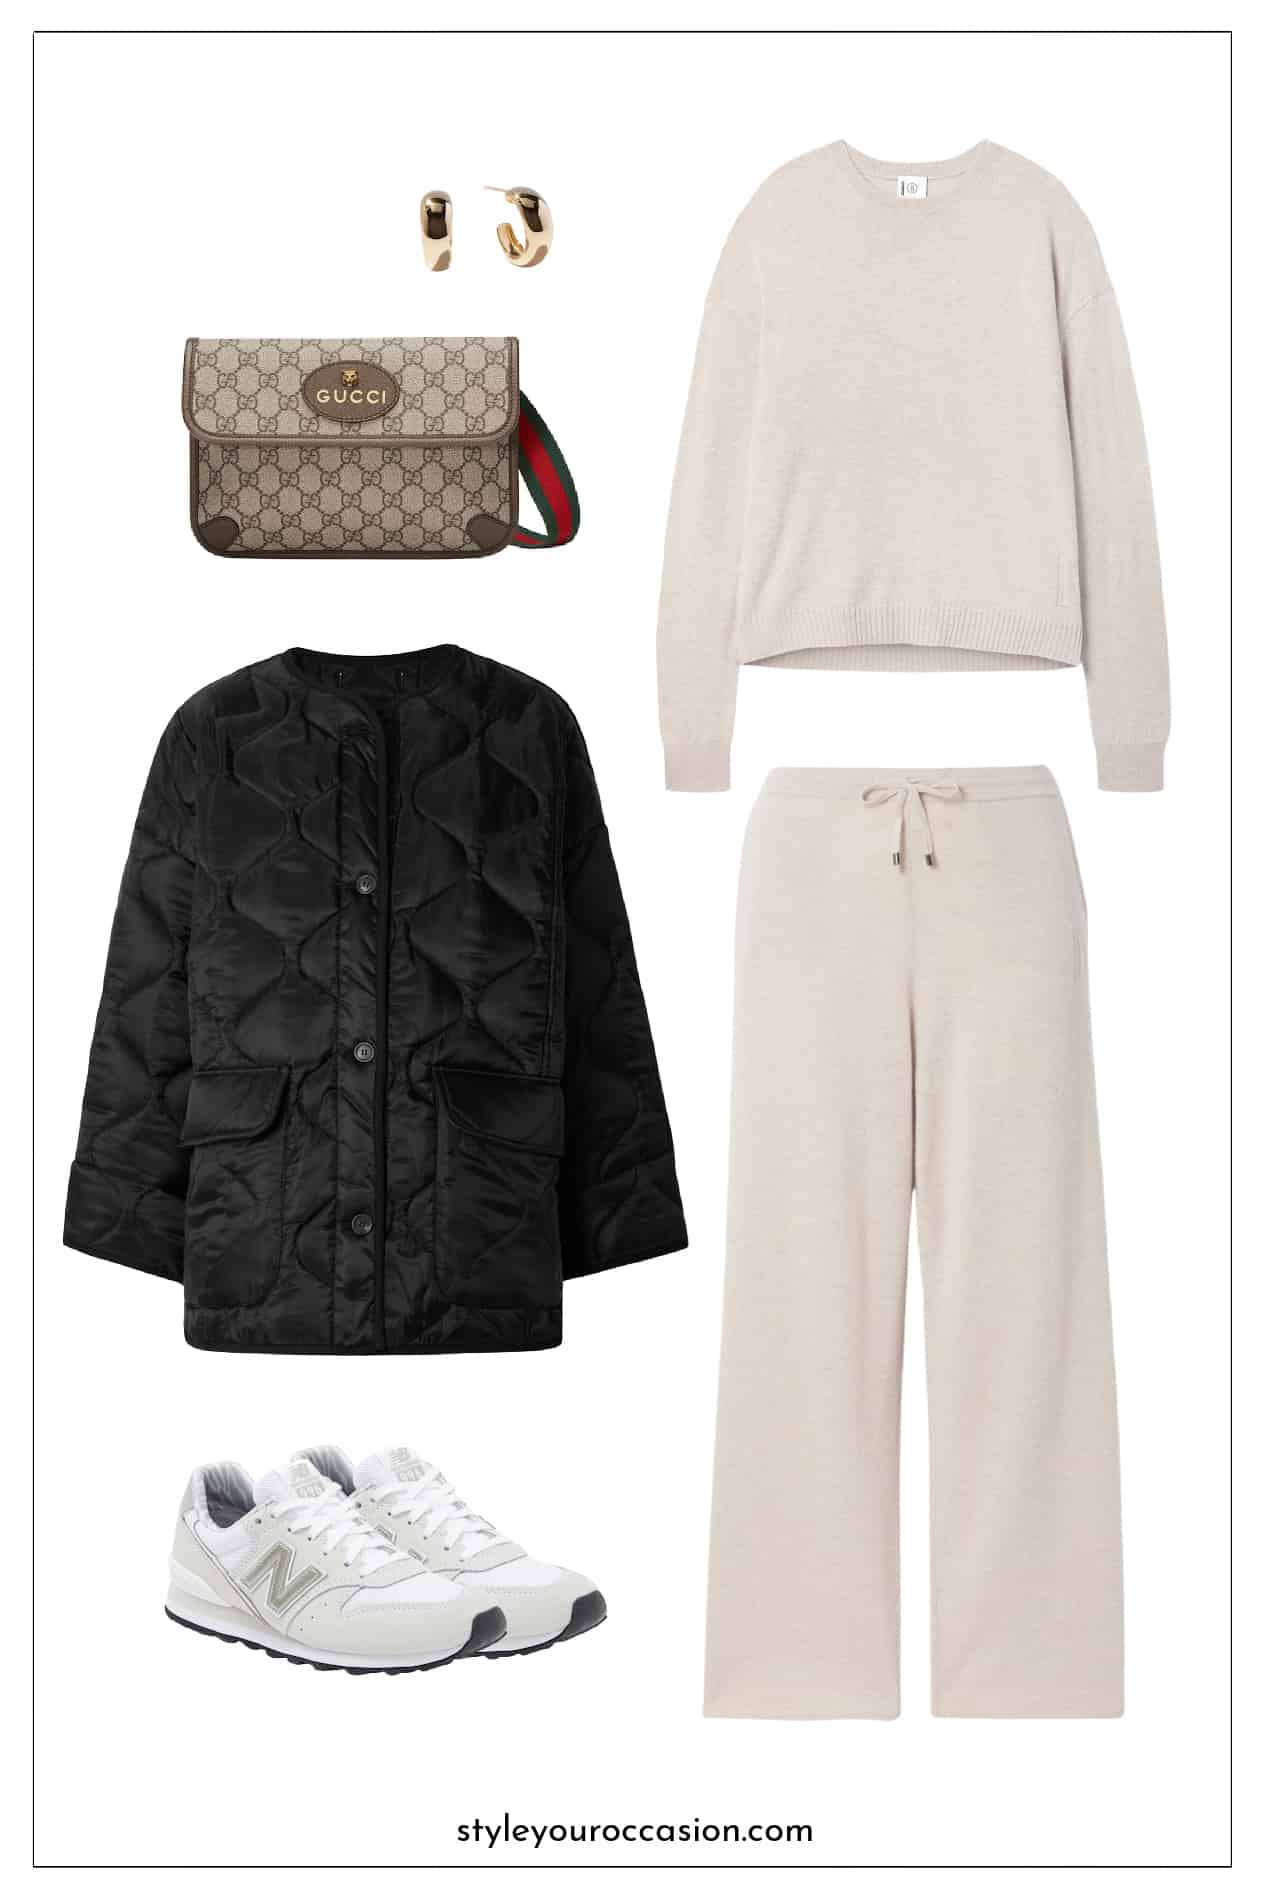 image of an outfit mood board with a matching ecru knit sweater and pants set, quilted black jacket, Gucci supreme belt bag, and white sneakers